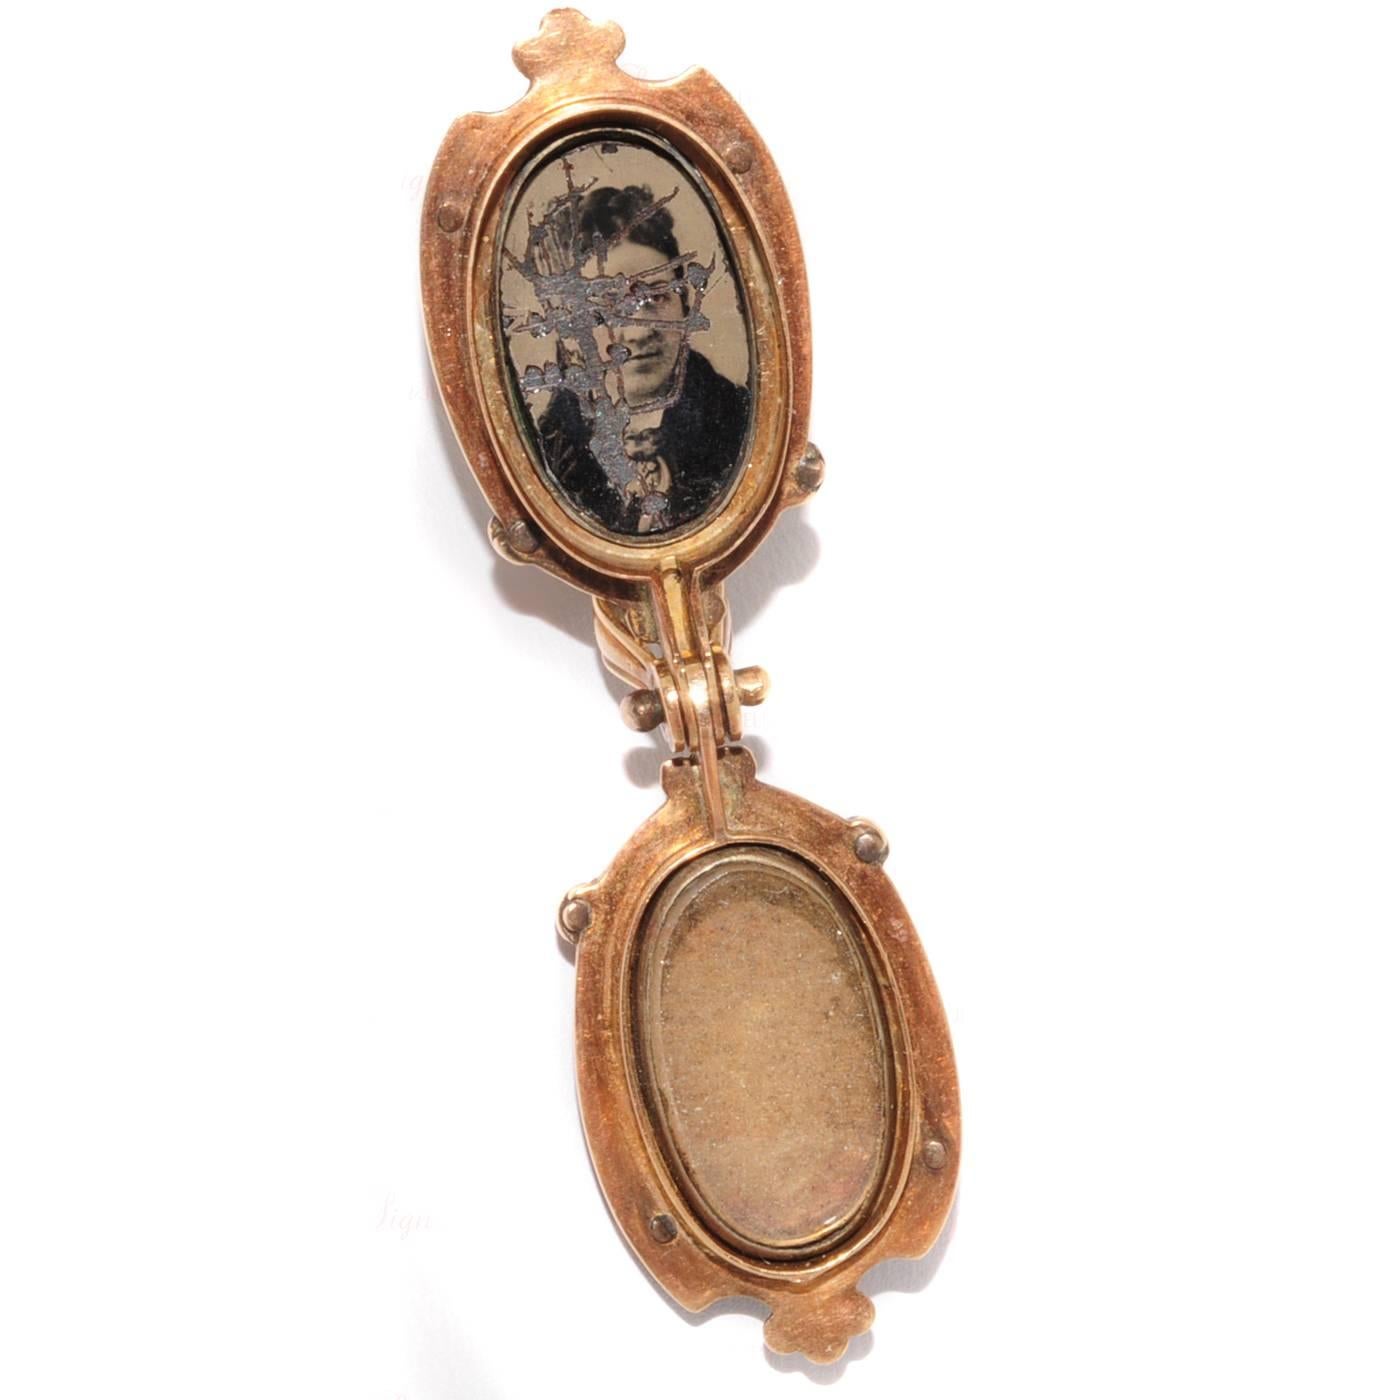 This antique ornate double-portrait locket was made in 1880s. It is crafted in 14k yellow gold and accented with light blue enamel to form a romantic floral design. Inside a locket is a scraped vernacular photograph of a man. Measurements: 0.74